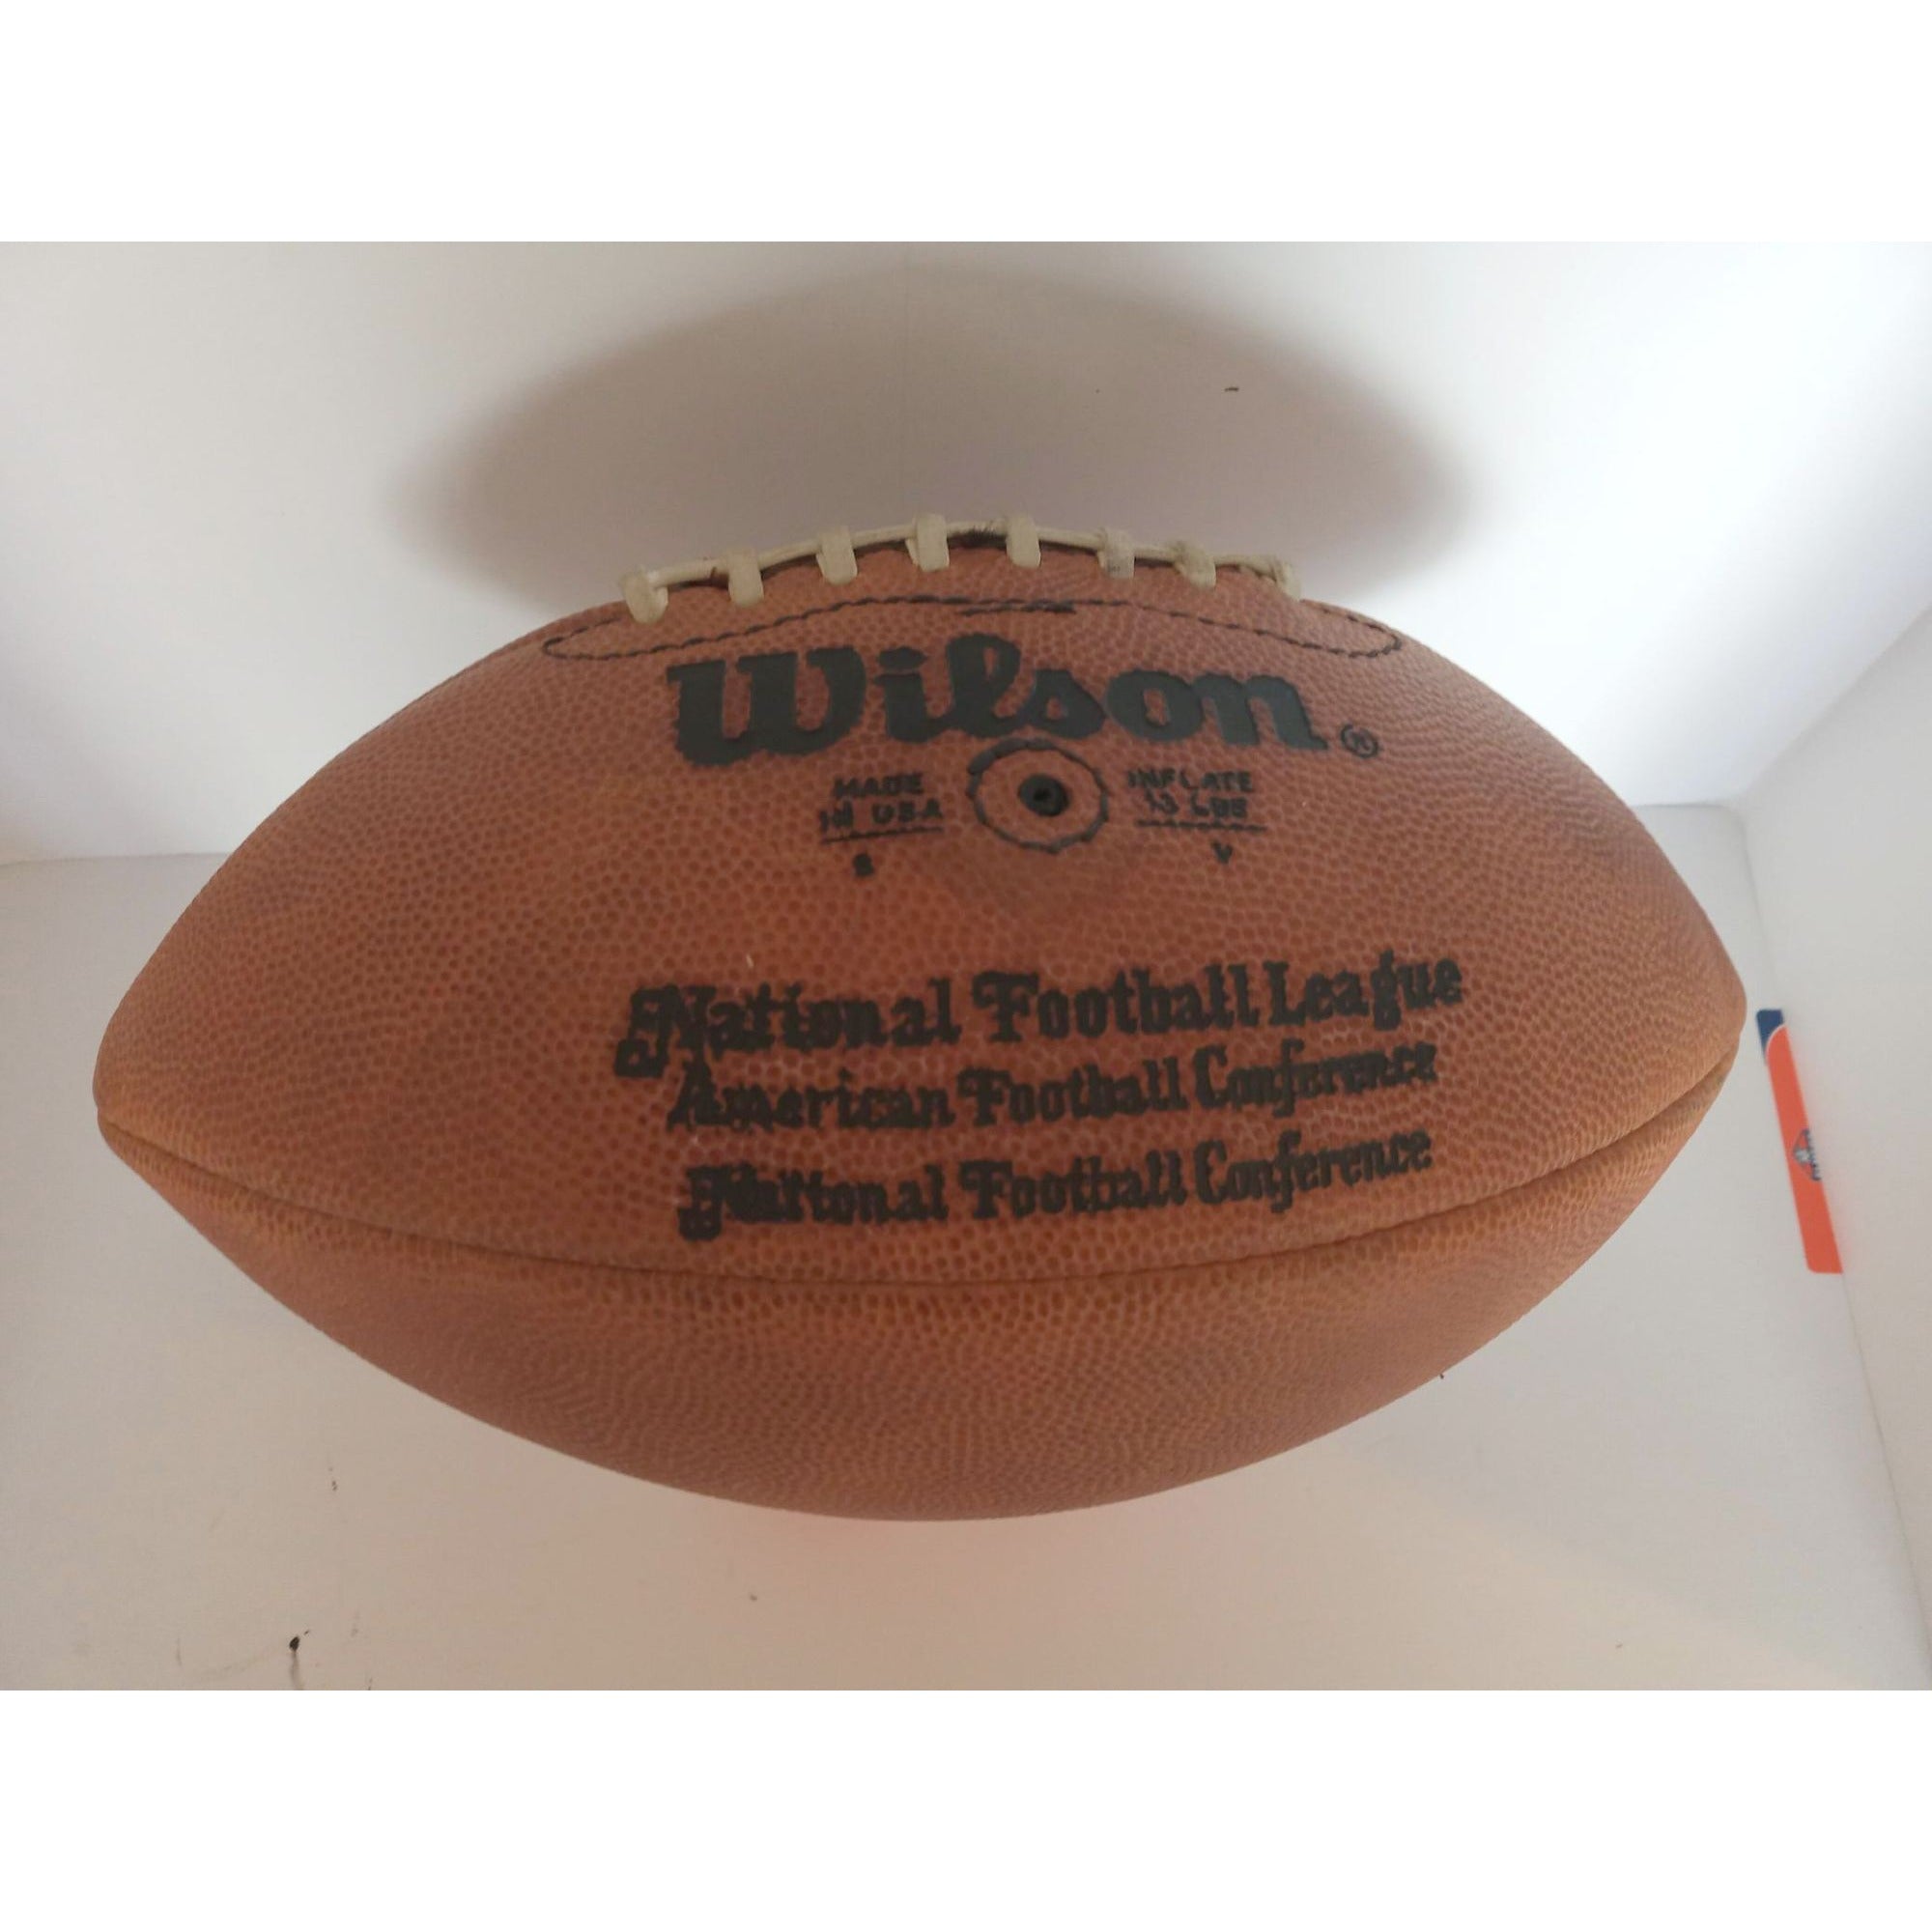 Johnny Unitas Baltimore Colts Pete Rozelle NFL game football signed with proof